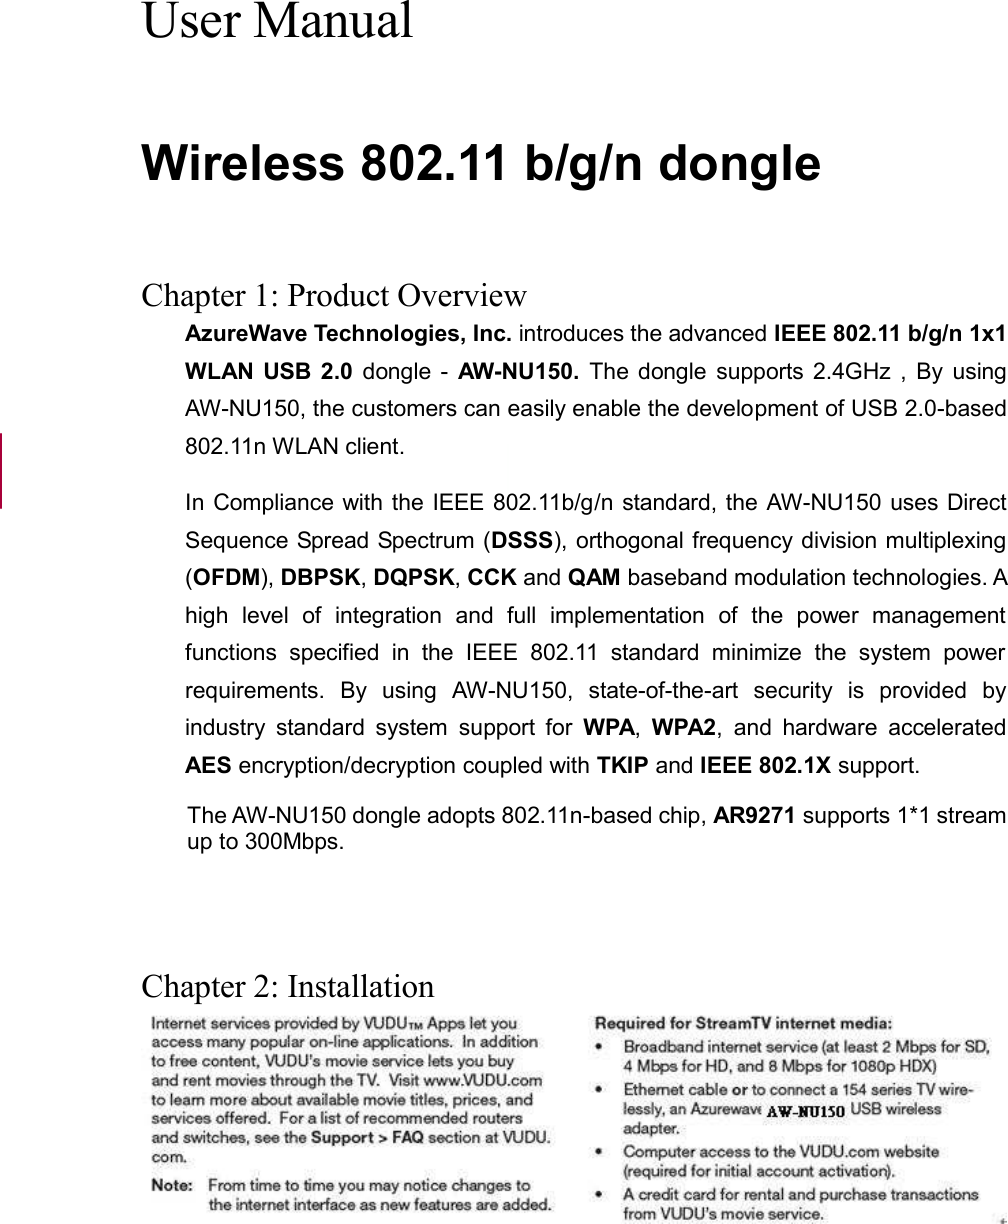  User Manual  Wireless 802.11 b/g/n dongle   Chapter 1: Product Overview AzureWave Technologies, Inc. introduces the advanced IEEE 802.11 b/g/n 1x1 WLAN USB  2.0  dongle  -  AW-NU150.  The  dongle  supports  2.4GHz  , By  using AW-NU150, the customers can easily enable the development of USB 2.0-based 802.11n WLAN client. In Compliance with the IEEE 802.11b/g/n standard, the AW-NU150 uses Direct Sequence Spread Spectrum (DSSS), orthogonal frequency division multiplexing (OFDM), DBPSK, DQPSK, CCK and QAM baseband modulation technologies. A high  level  of  integration  and  full  implementation  of  the  power  management functions  specified  in  the  IEEE  802.11  standard  minimize  the  system  power requirements.  By  using  AW-NU150,  state-of-the-art  security  is  provided  by industry  standard  system  support  for  WPA,  WPA2,  and  hardware  accelerated AES encryption/decryption coupled with TKIP and IEEE 802.1X support.   The AW-NU150 dongle adopts 802.11n-based chip, AR9271 supports 1*1 stream up to 300Mbps.    Chapter 2: Installation   